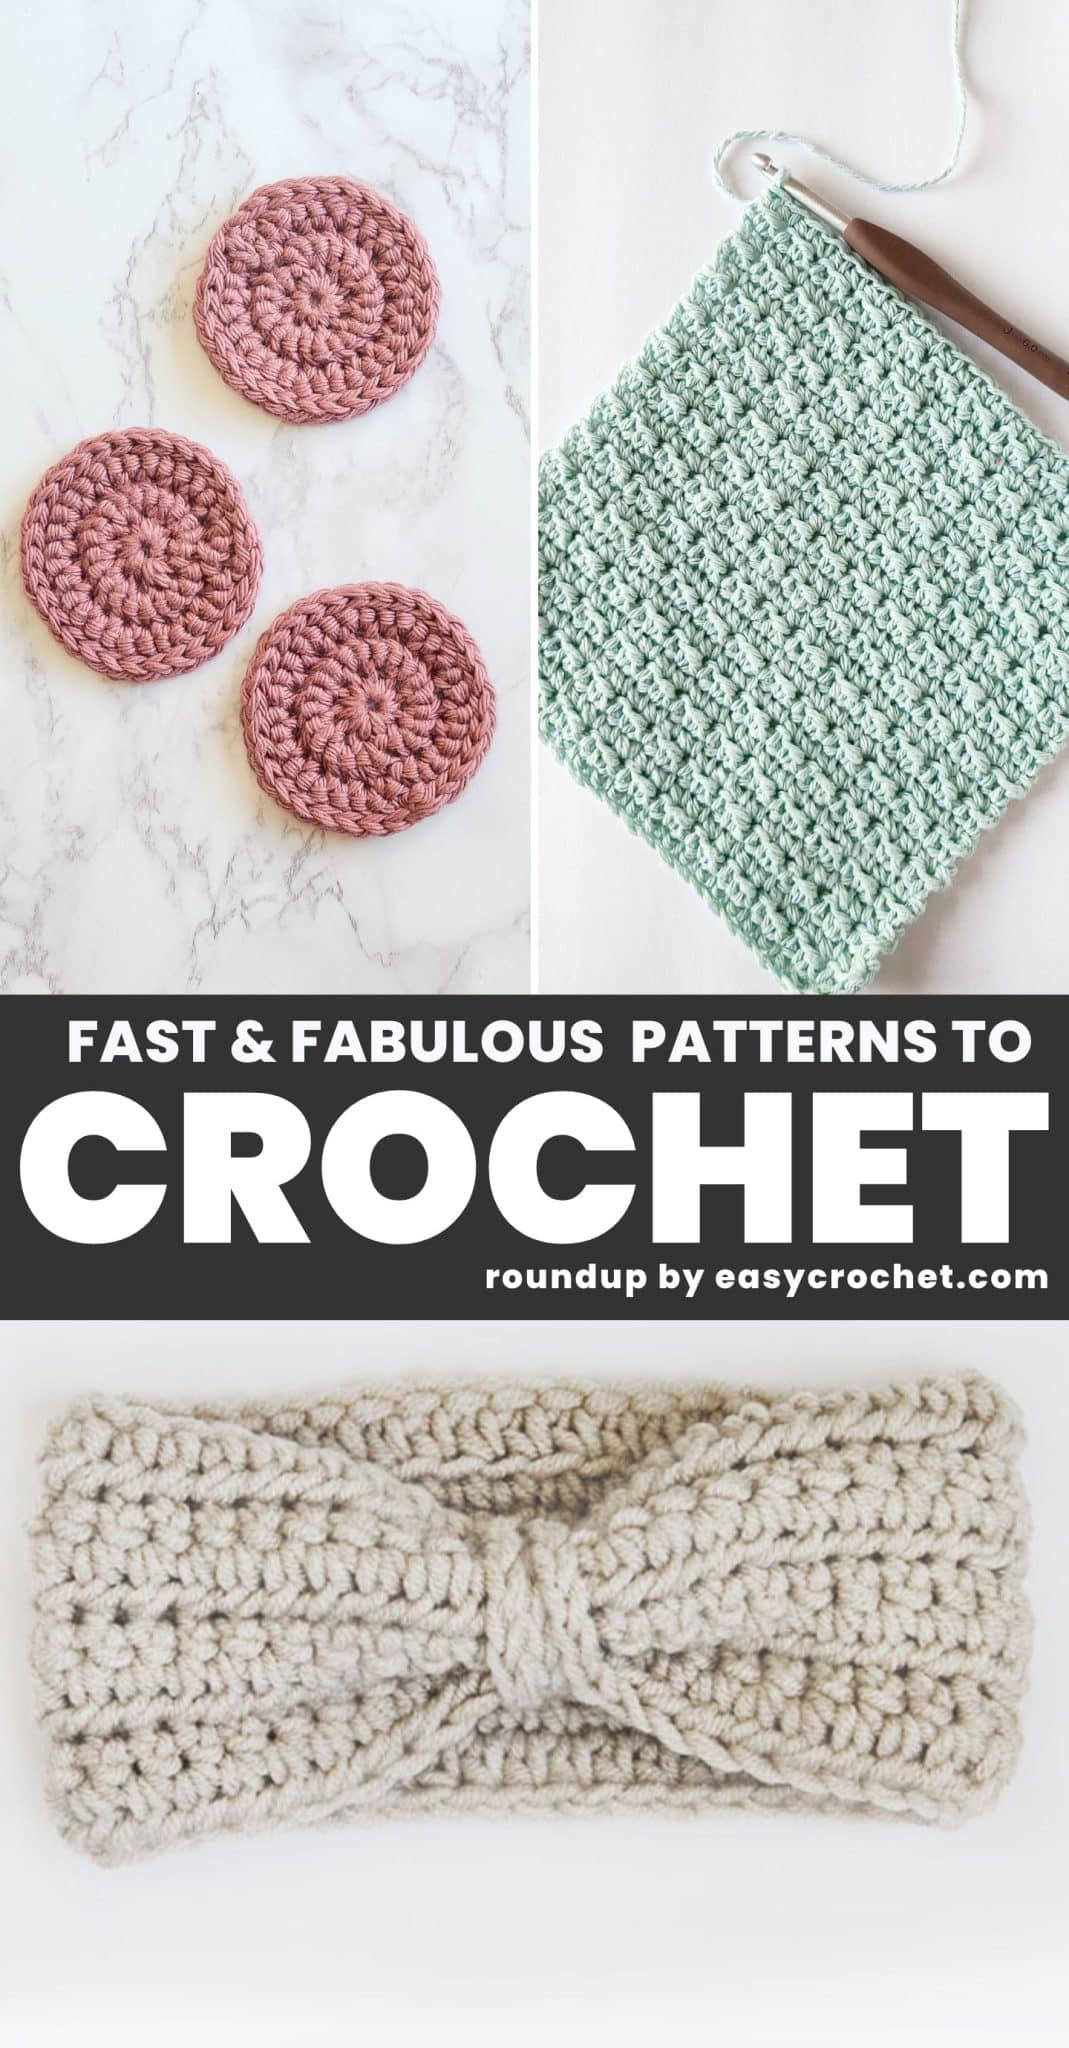 11 Quick Crochet Patterns for Fast and Fabulous Projects - Easy